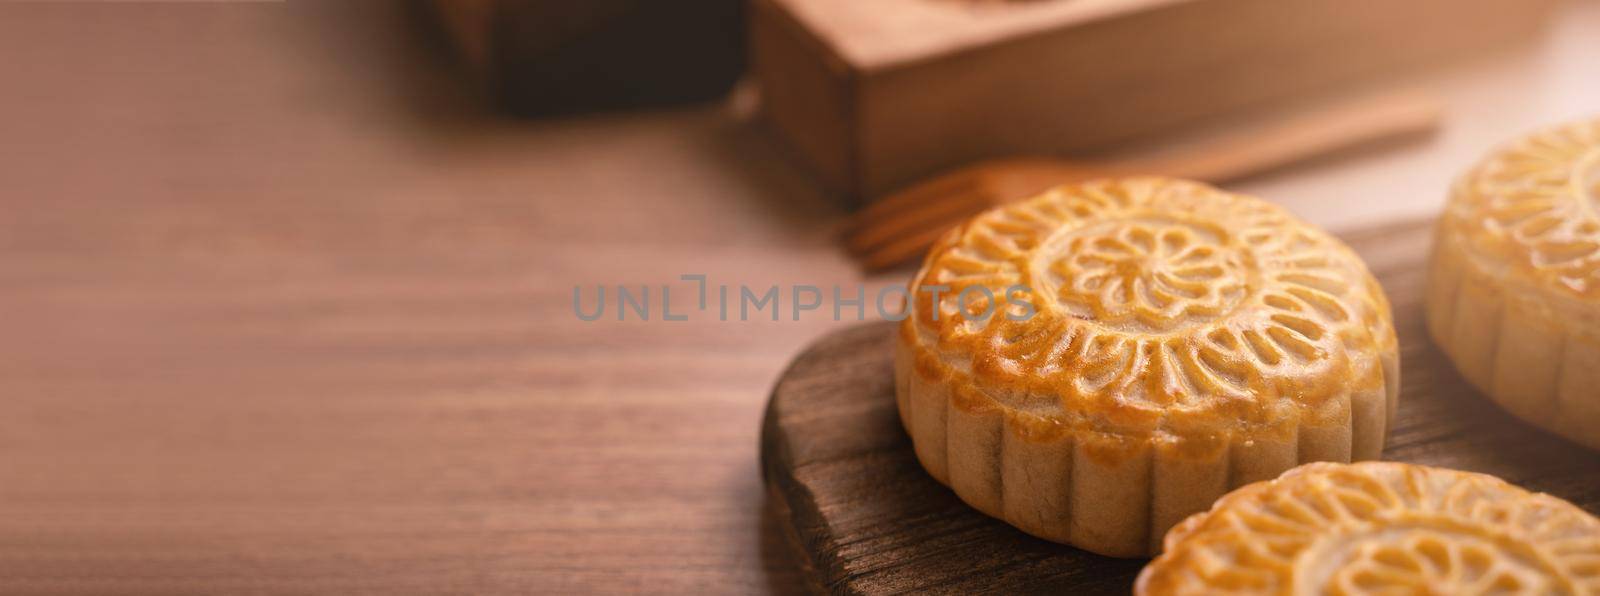 Round shaped fresh baked moon cake pastry - Chinese moonckae for Mid-Autumn Moon Festival on wooden background and serving tray, close up, copy space by ROMIXIMAGE